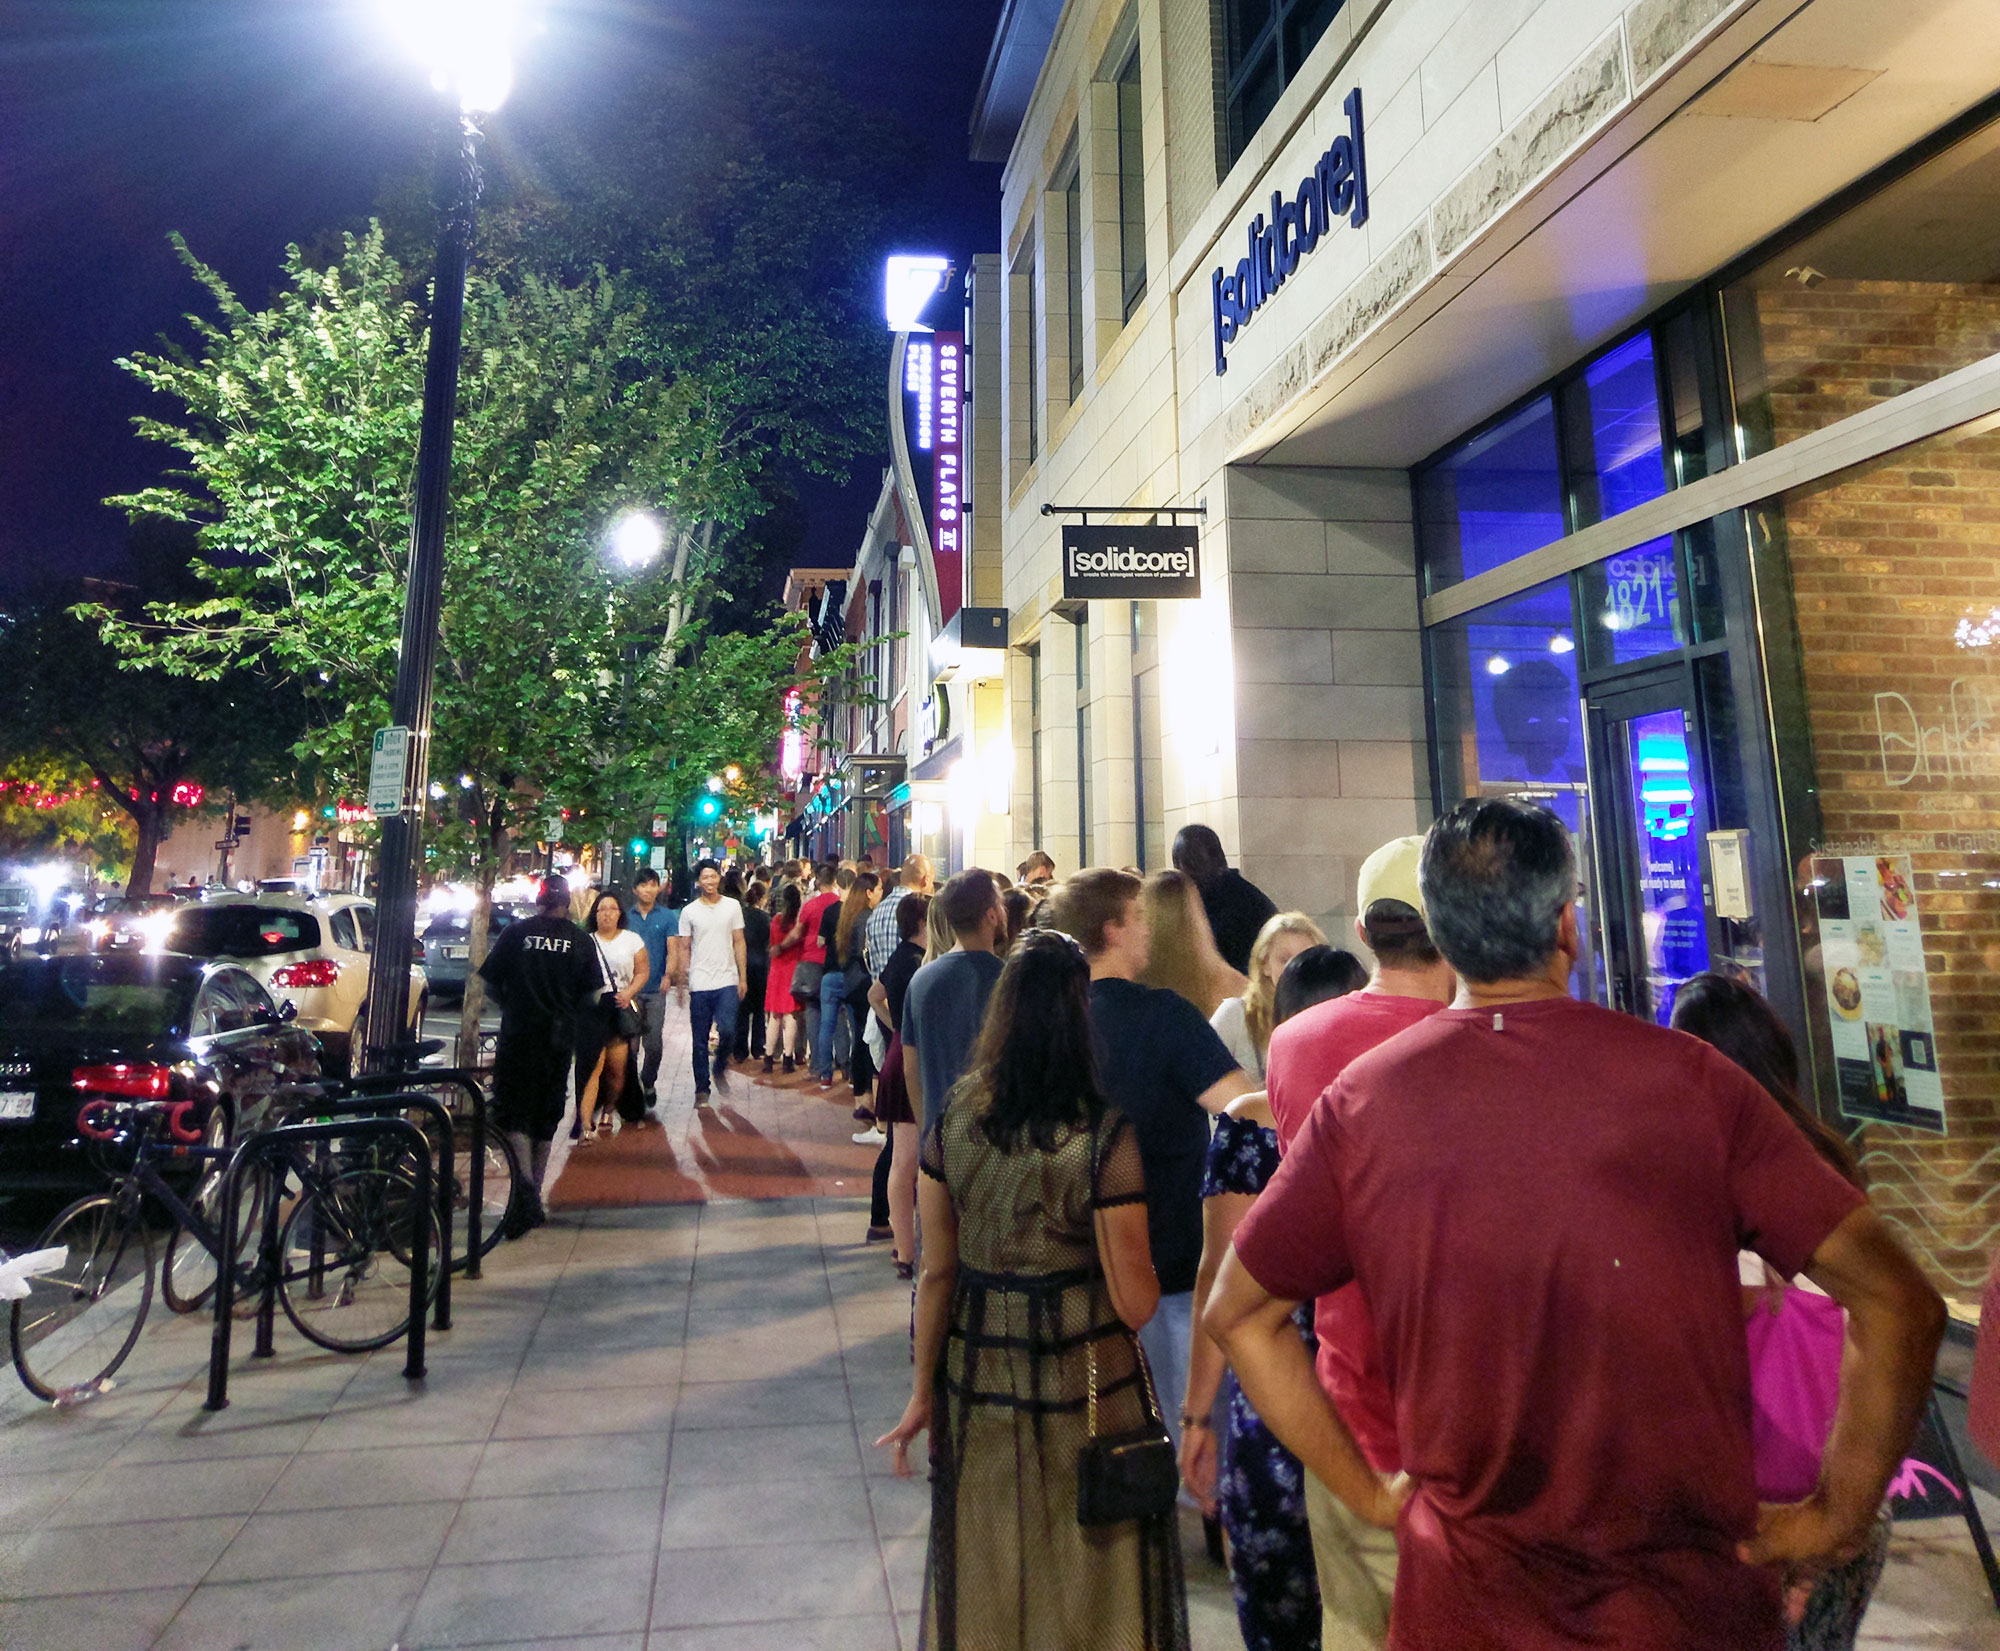 The 200-person line at the Game of Thrones pop-up bar in Washington D.C.